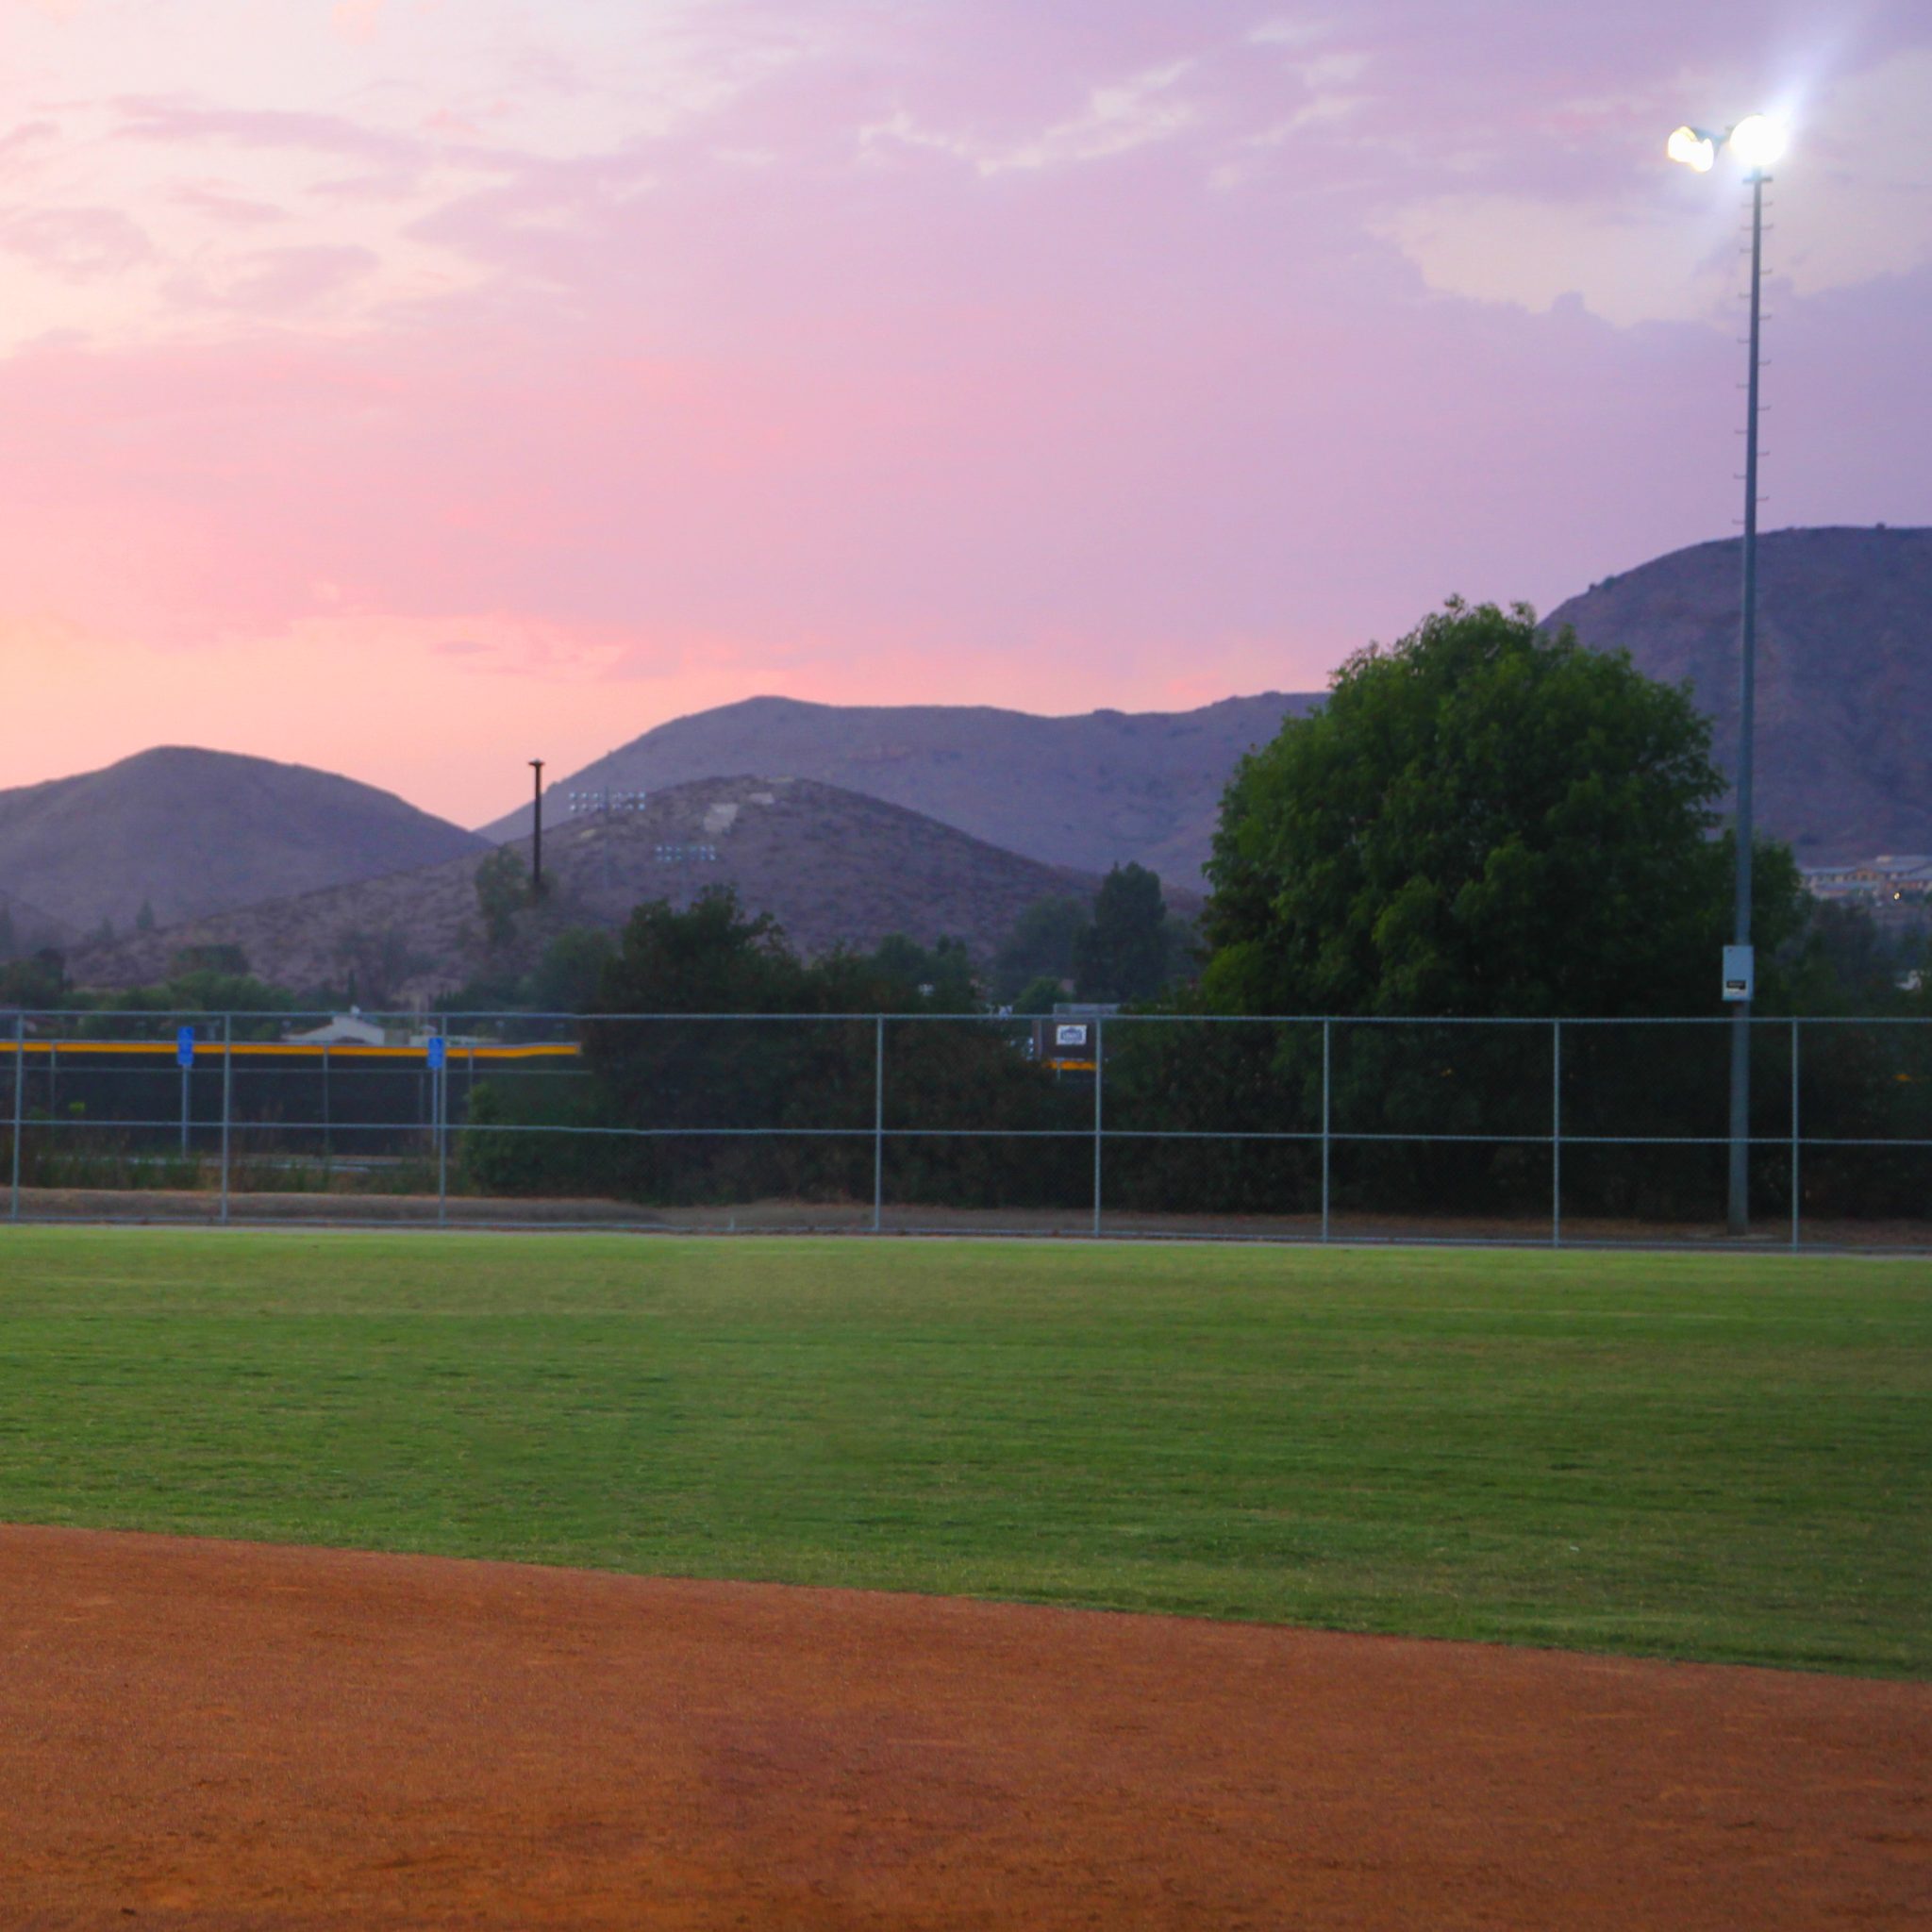 Field Conditions tab: photo of a baseball field at sunset with mountains in the background